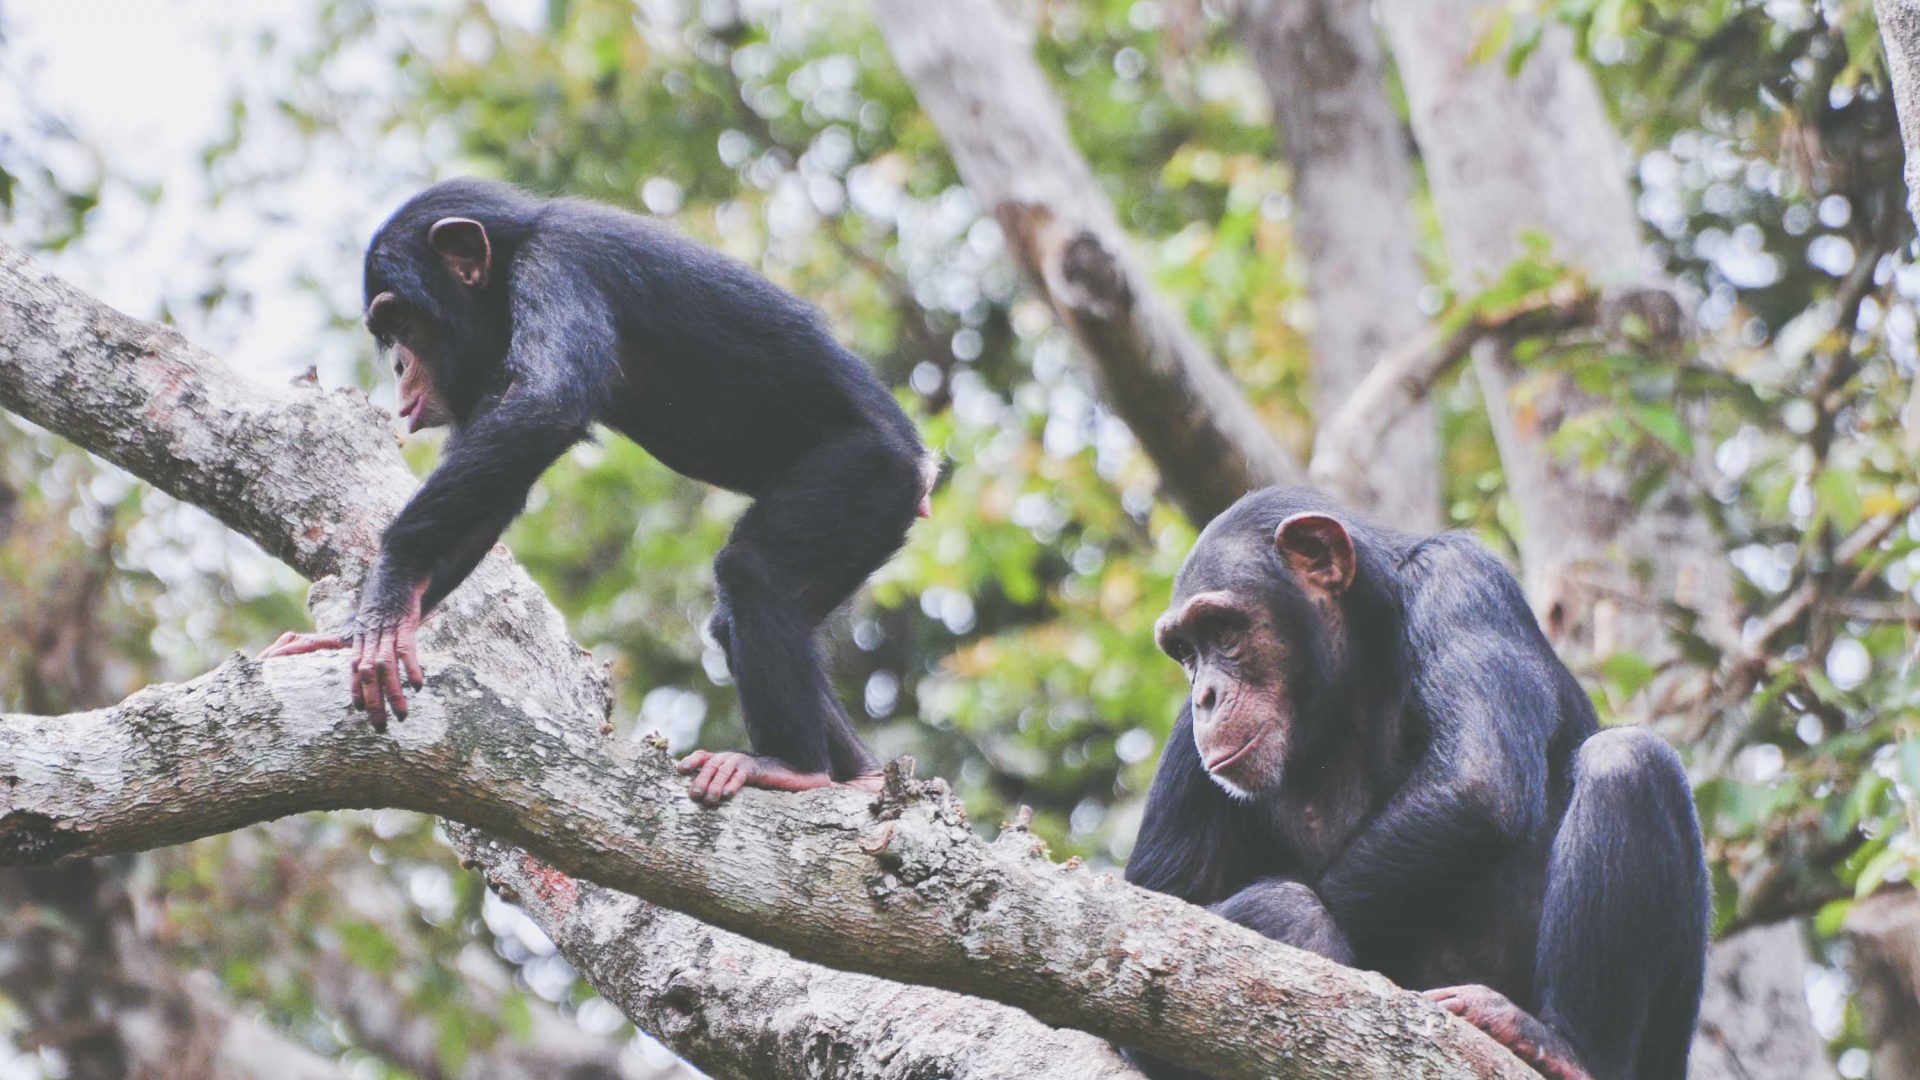 How the chimp became the face of Sierra Leone tourism